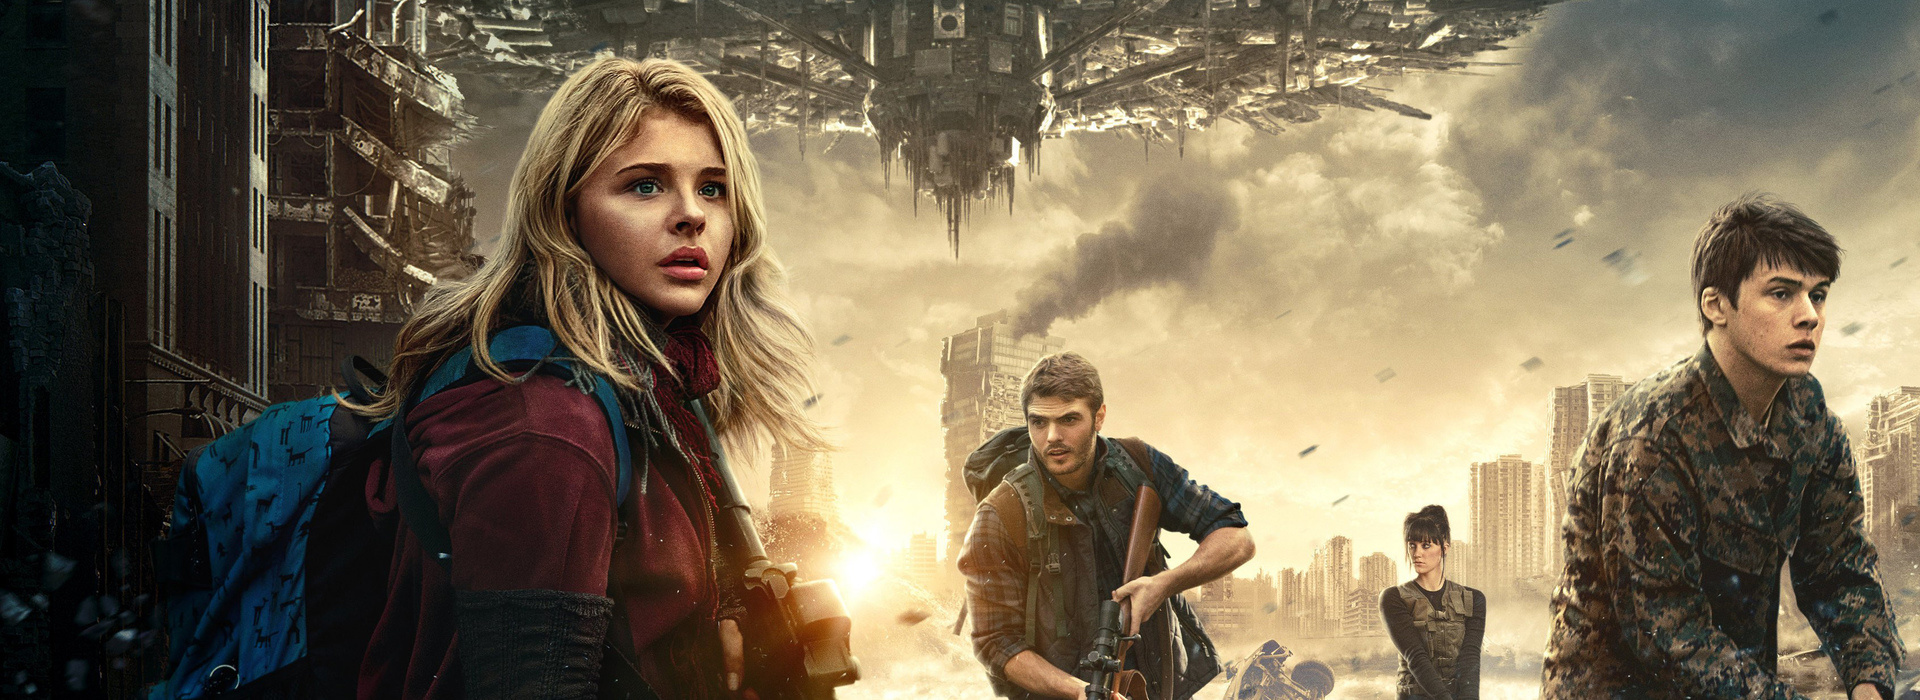 Movie poster The 5th Wave